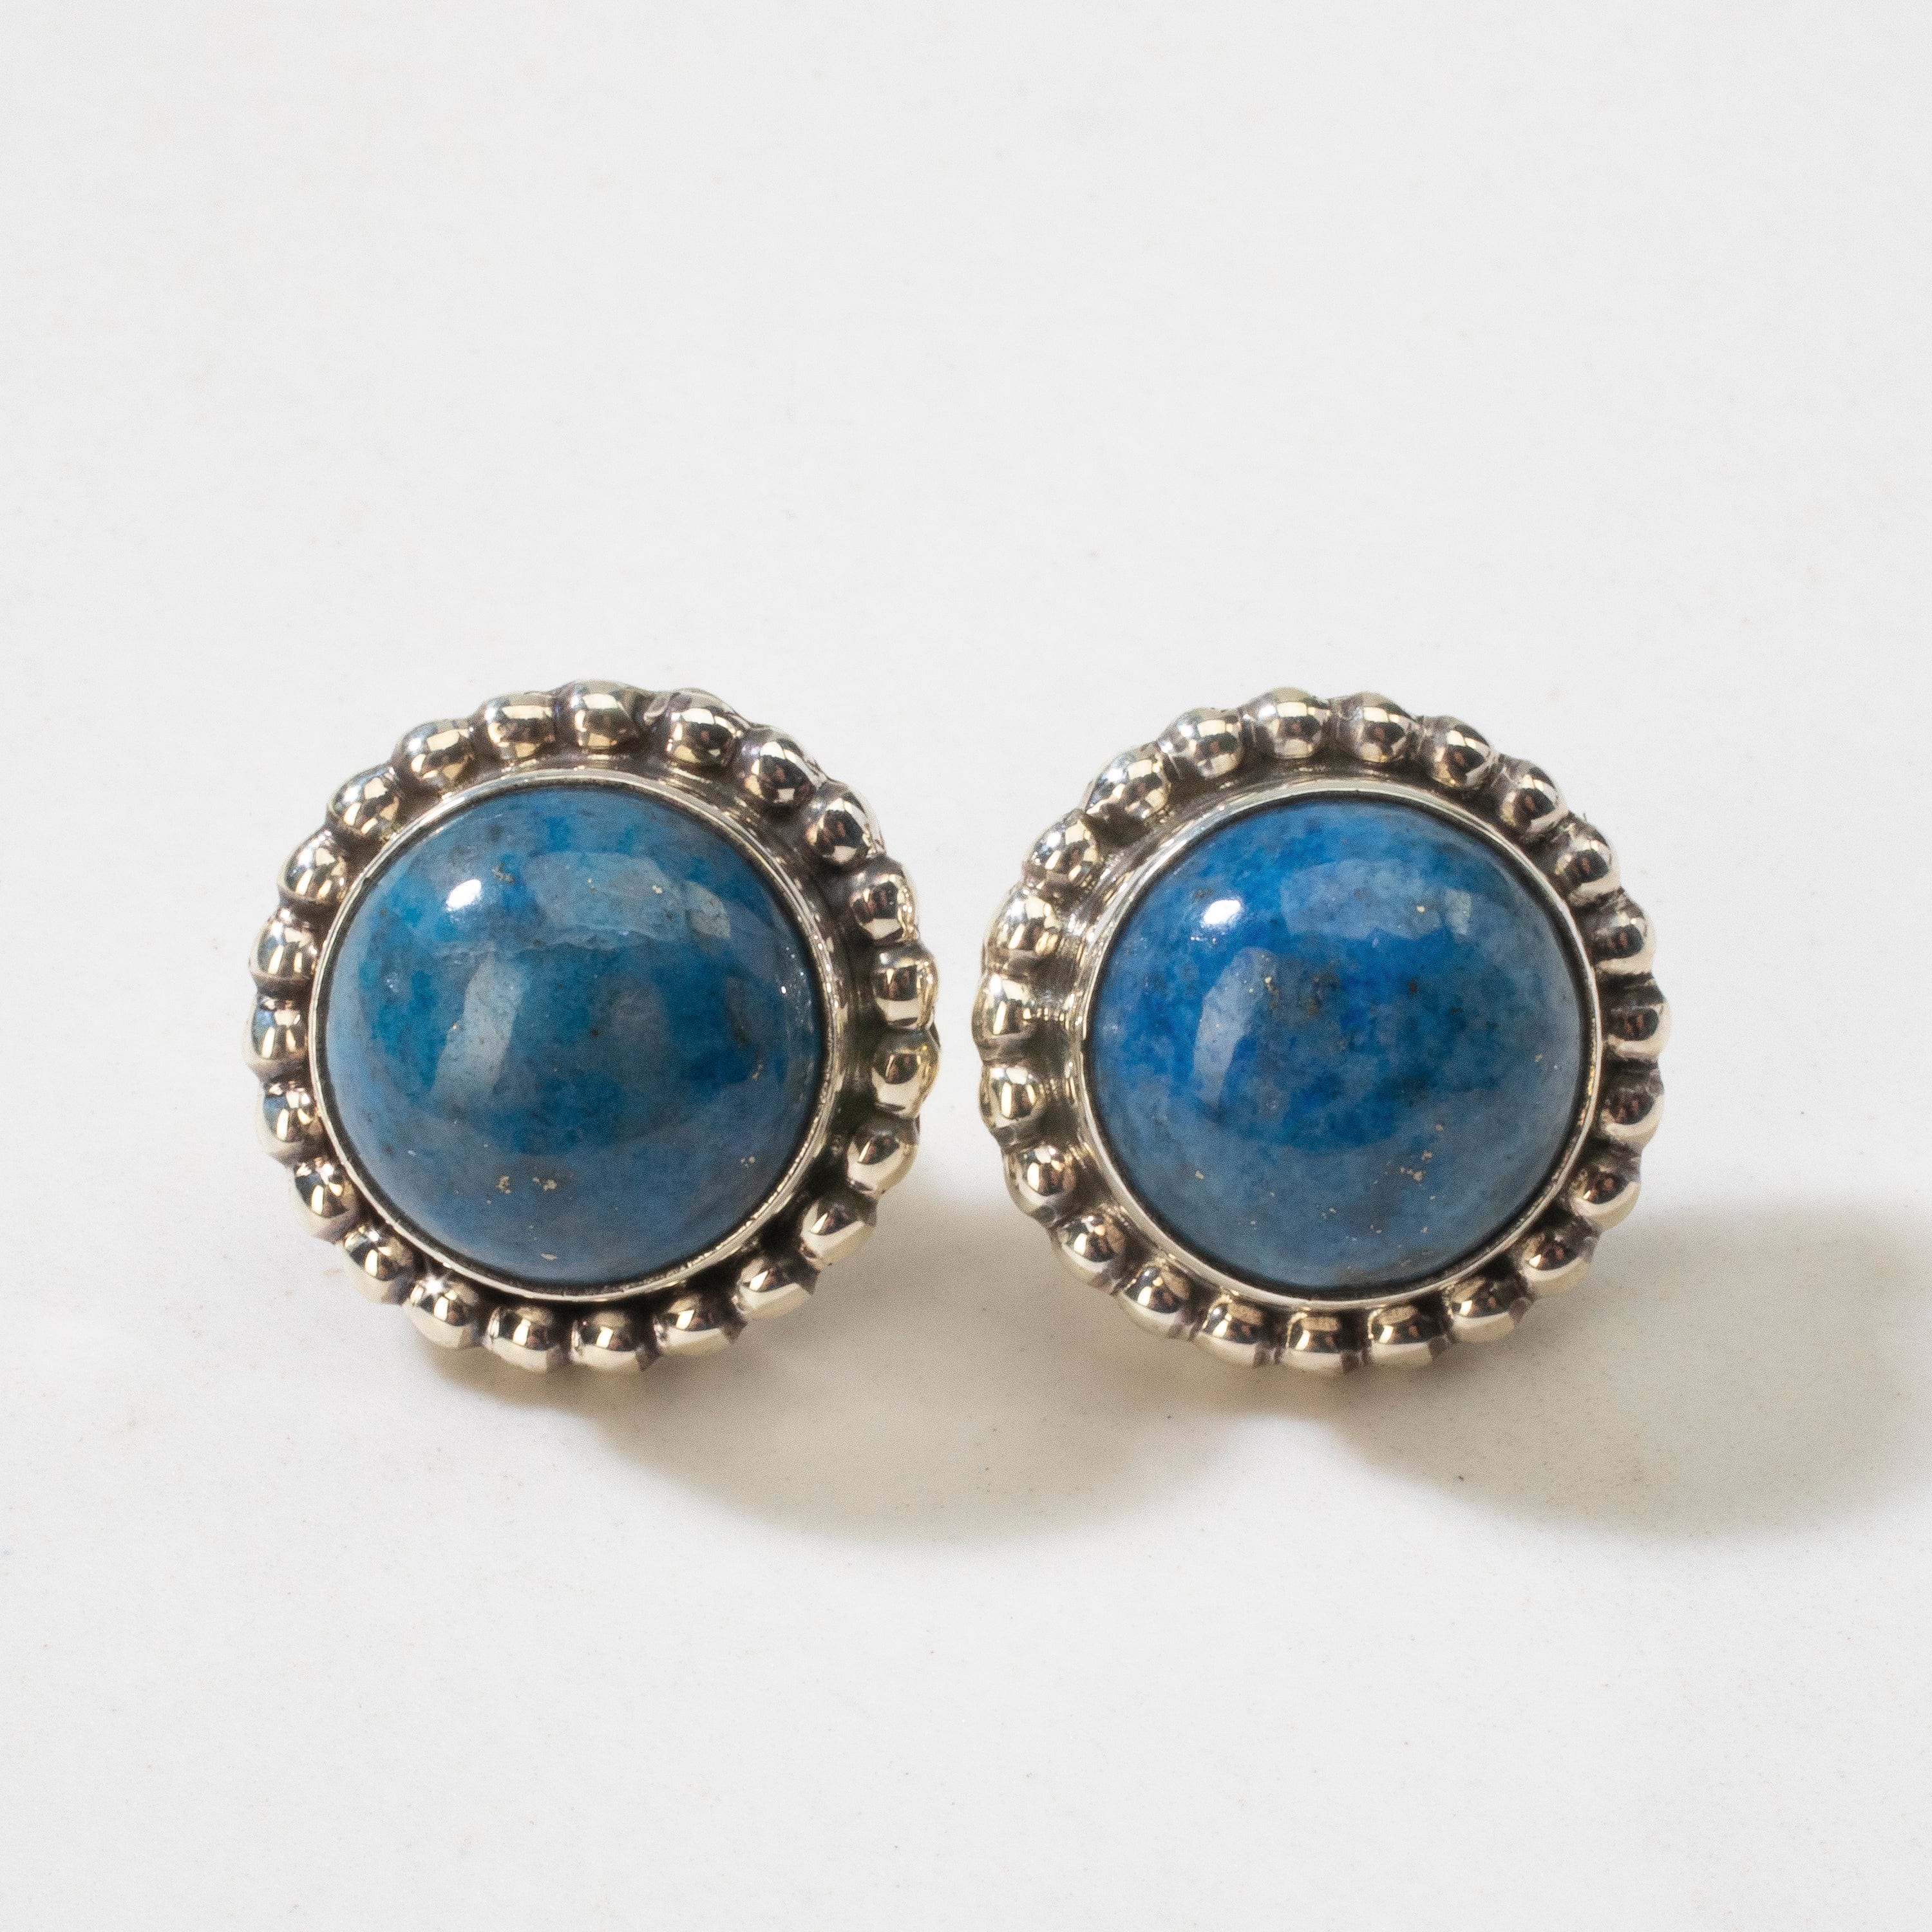 Kalifano Native American Jewelry Denim Lapis Round Navajo USA Native American Made 925 Sterling Silver Earrings with Stud Backing NAE300.035